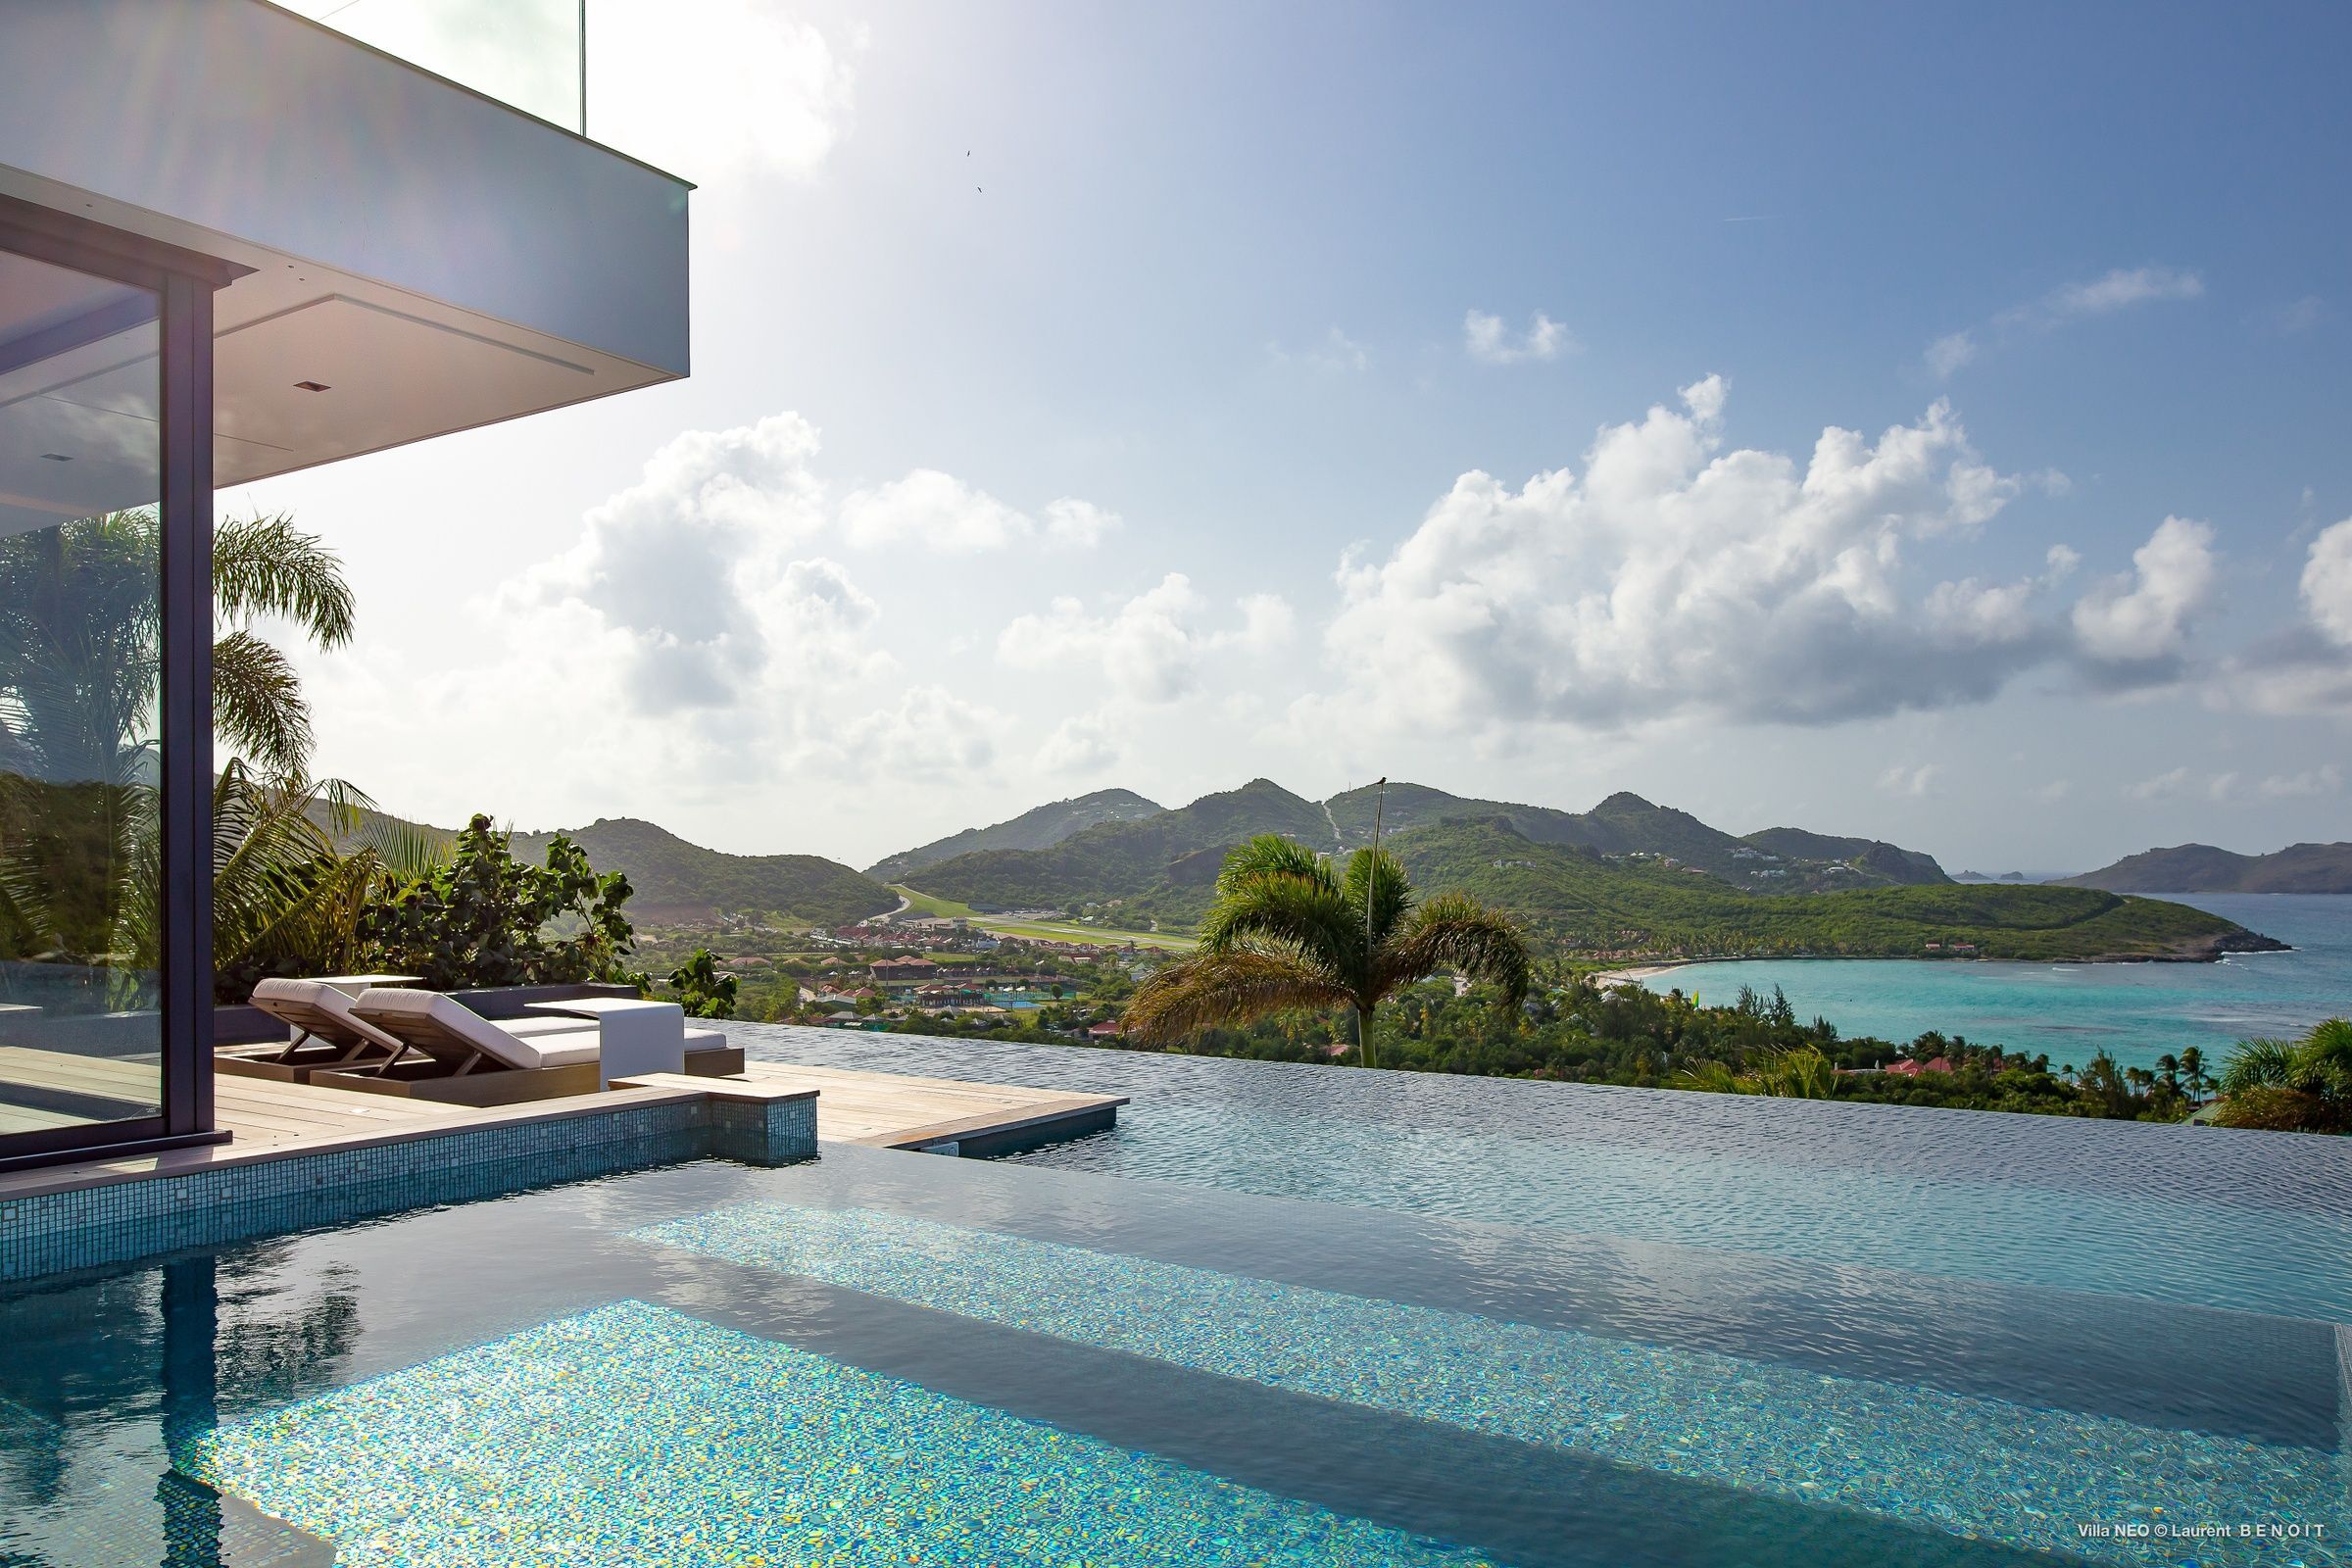 Exploring the Beautiful Beaches of St. Barts  Saint-Barth paradise -  Luxury villas for rent in St Barts